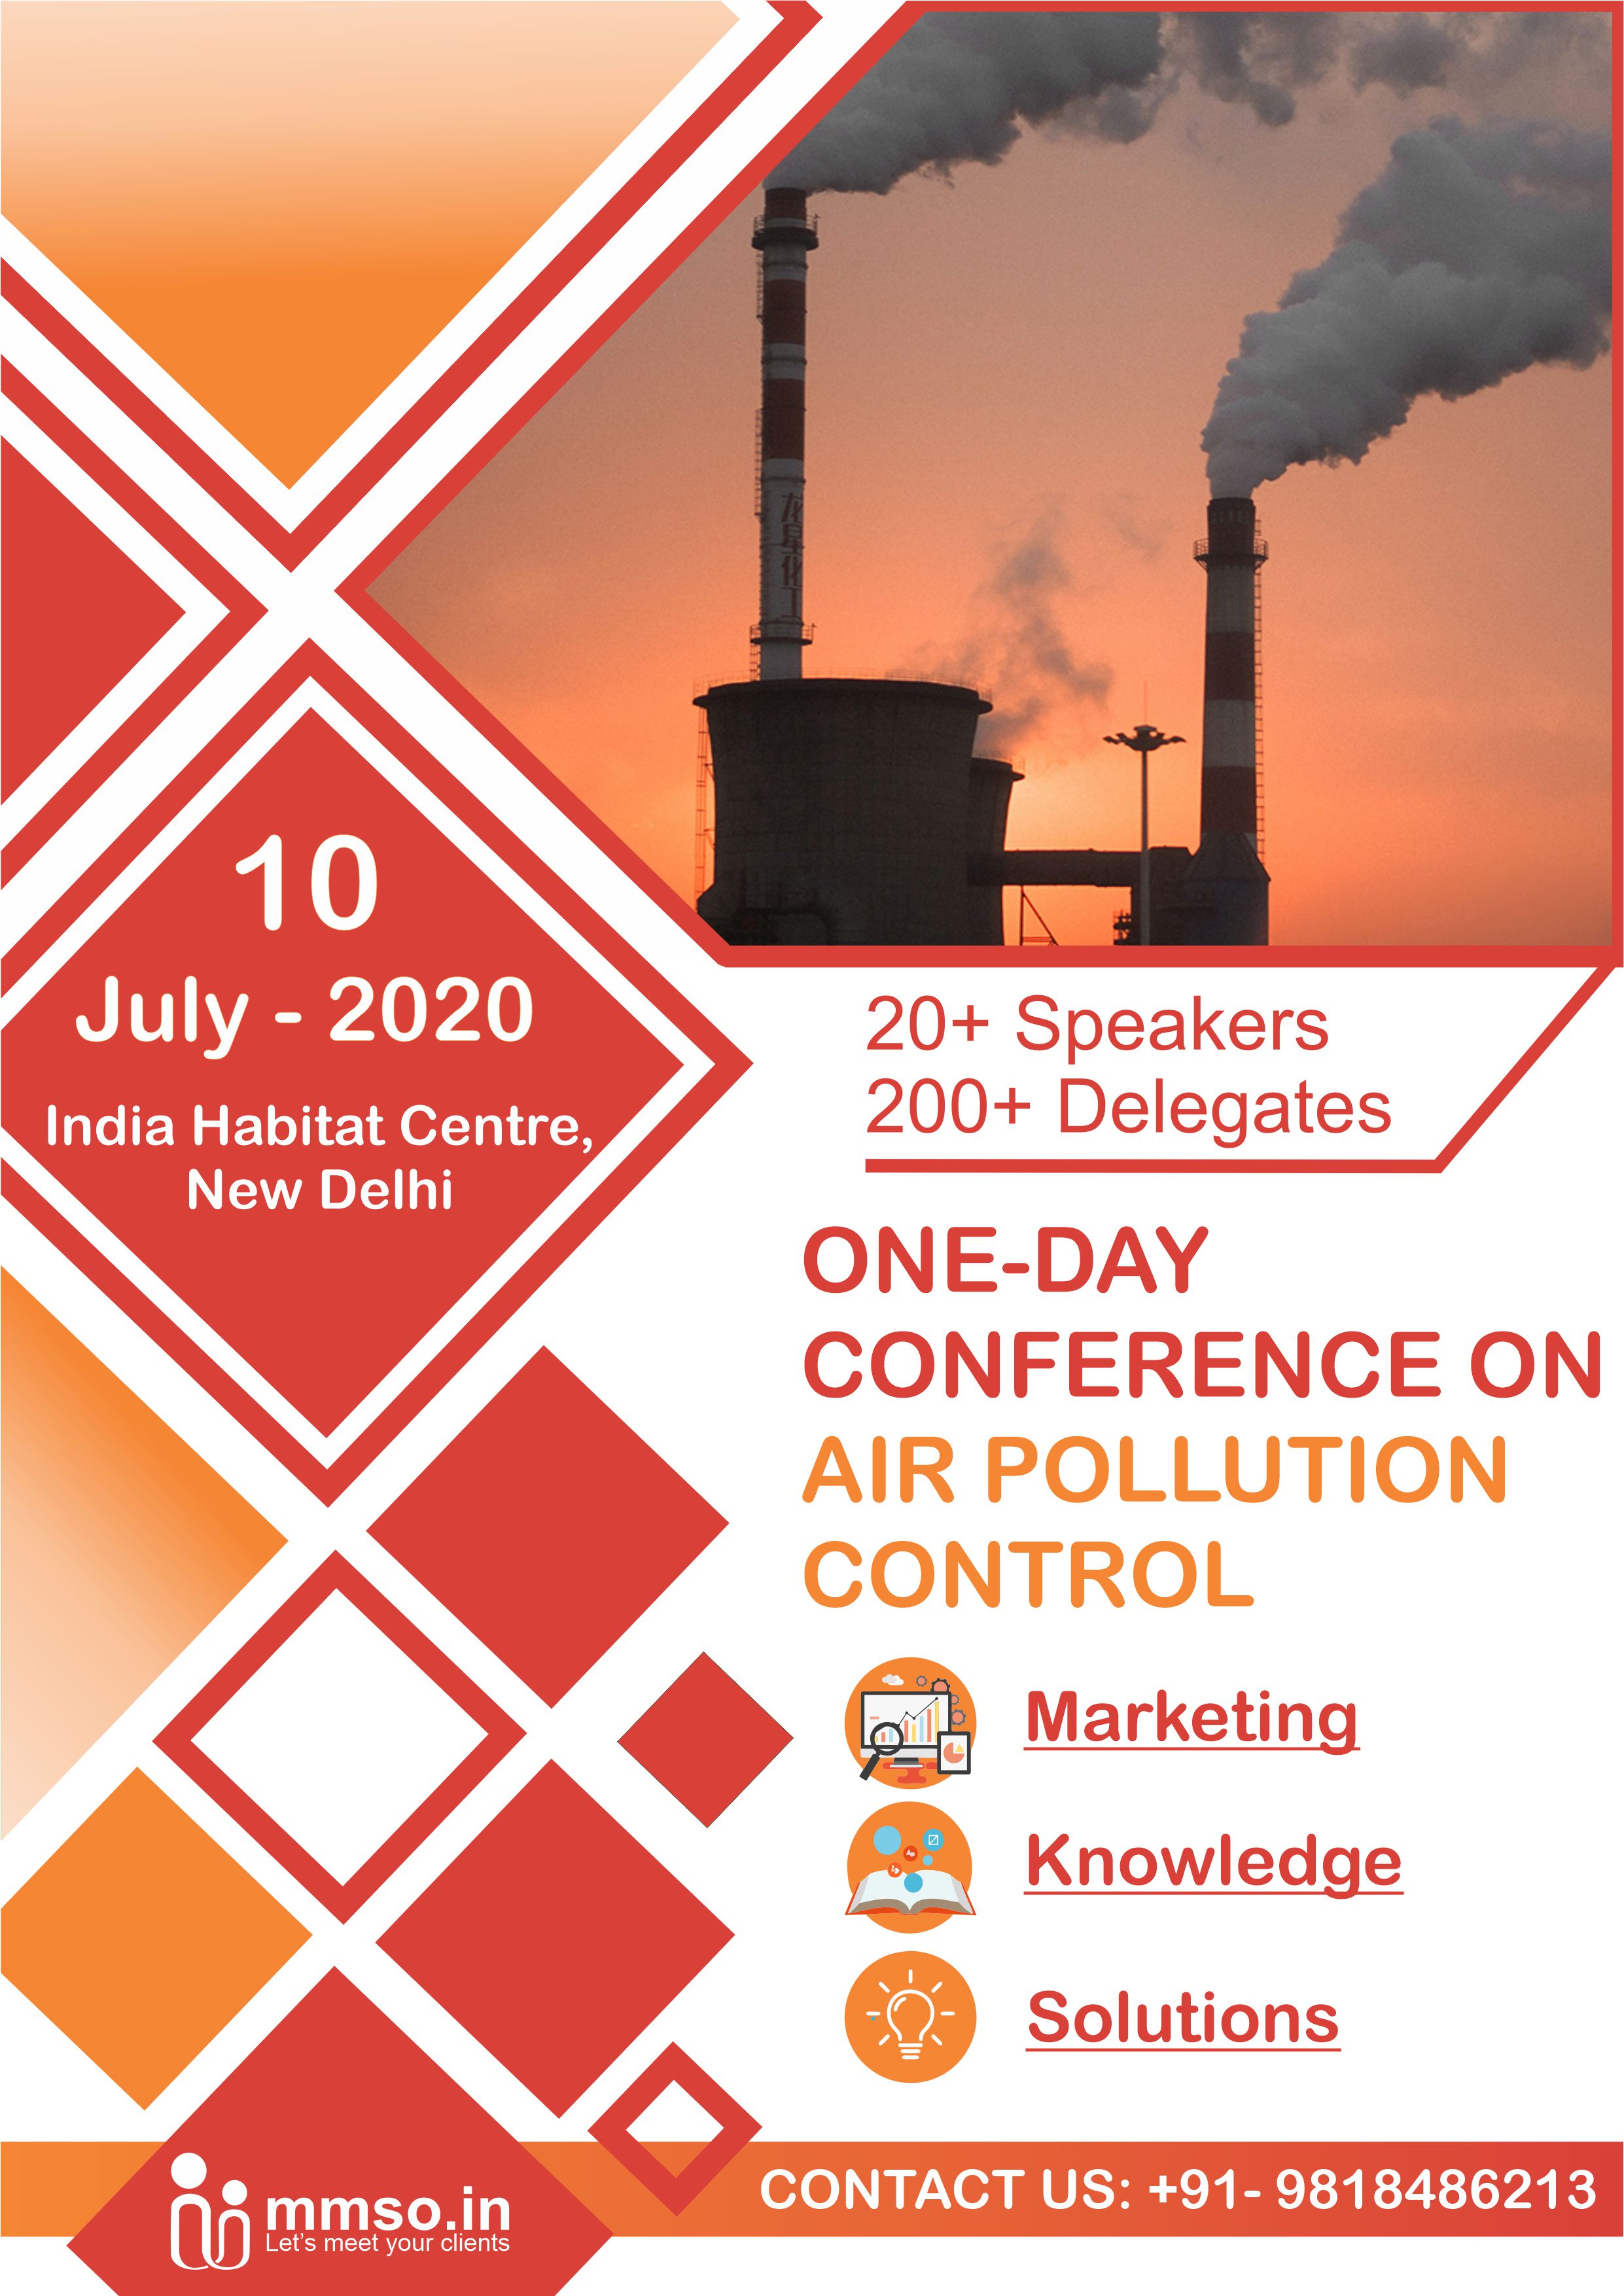 One Day Conference on Air Pollution Control, South Delhi, Delhi, India